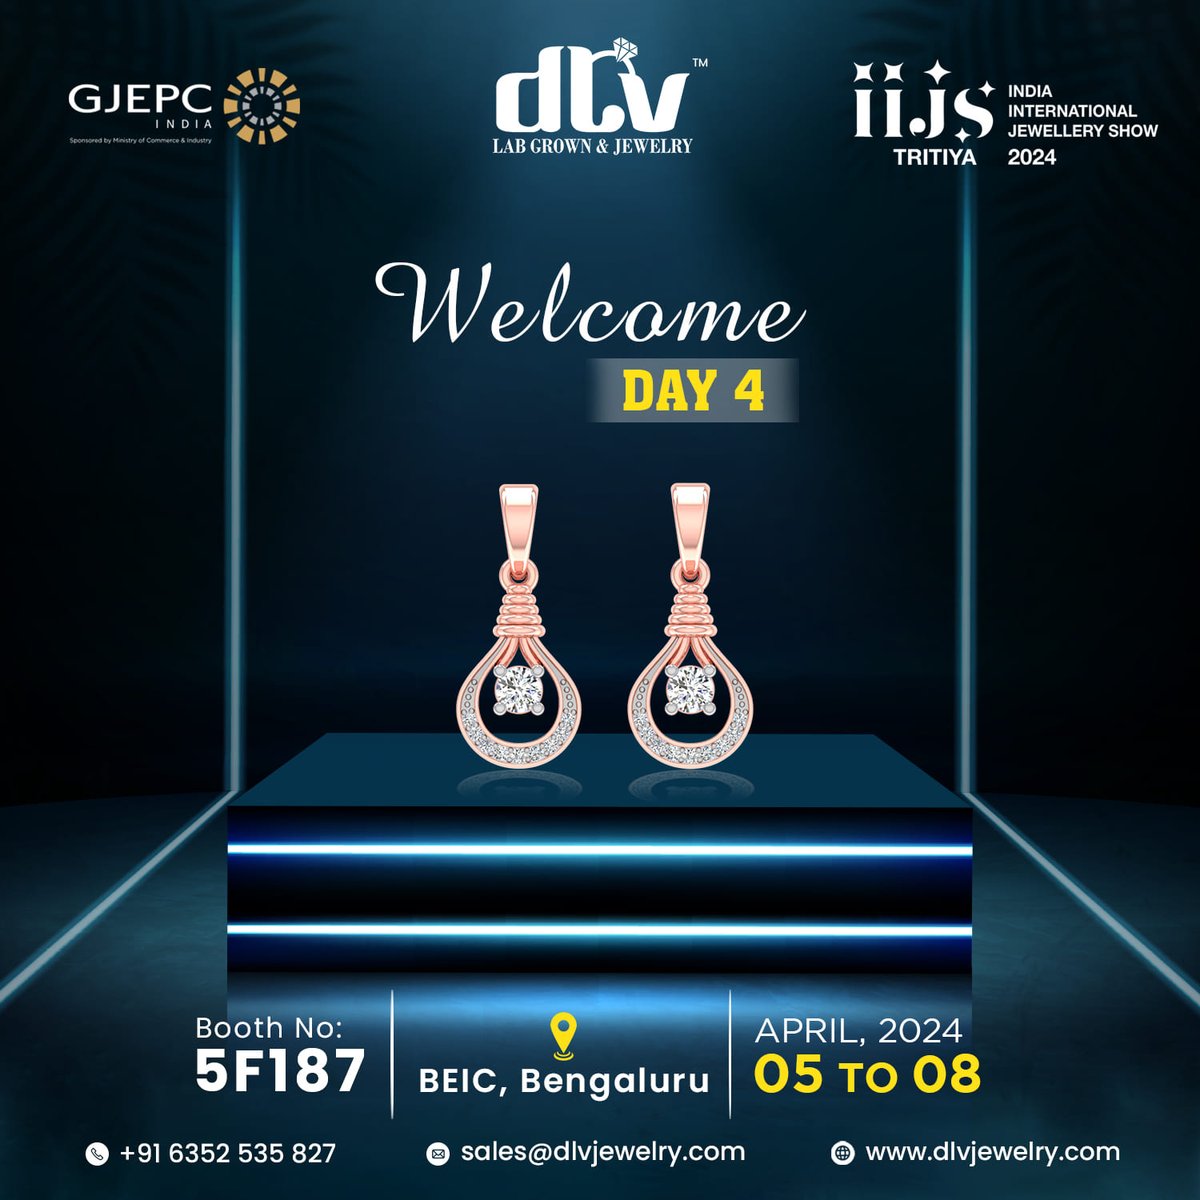 Earrings add an element of glamour and sophistication to any outfit.💗✨😍

USA 🇺🇲
Diamond 💎
Dlvjewelry 💝
Earrings ❤️
Best one design 🔥
_
_

dlvjewelry.com 🛍️
devlabtechventure.com 🎁

#dlvdiamondusa #usajewelry #earrings #specialperson #designerofusa